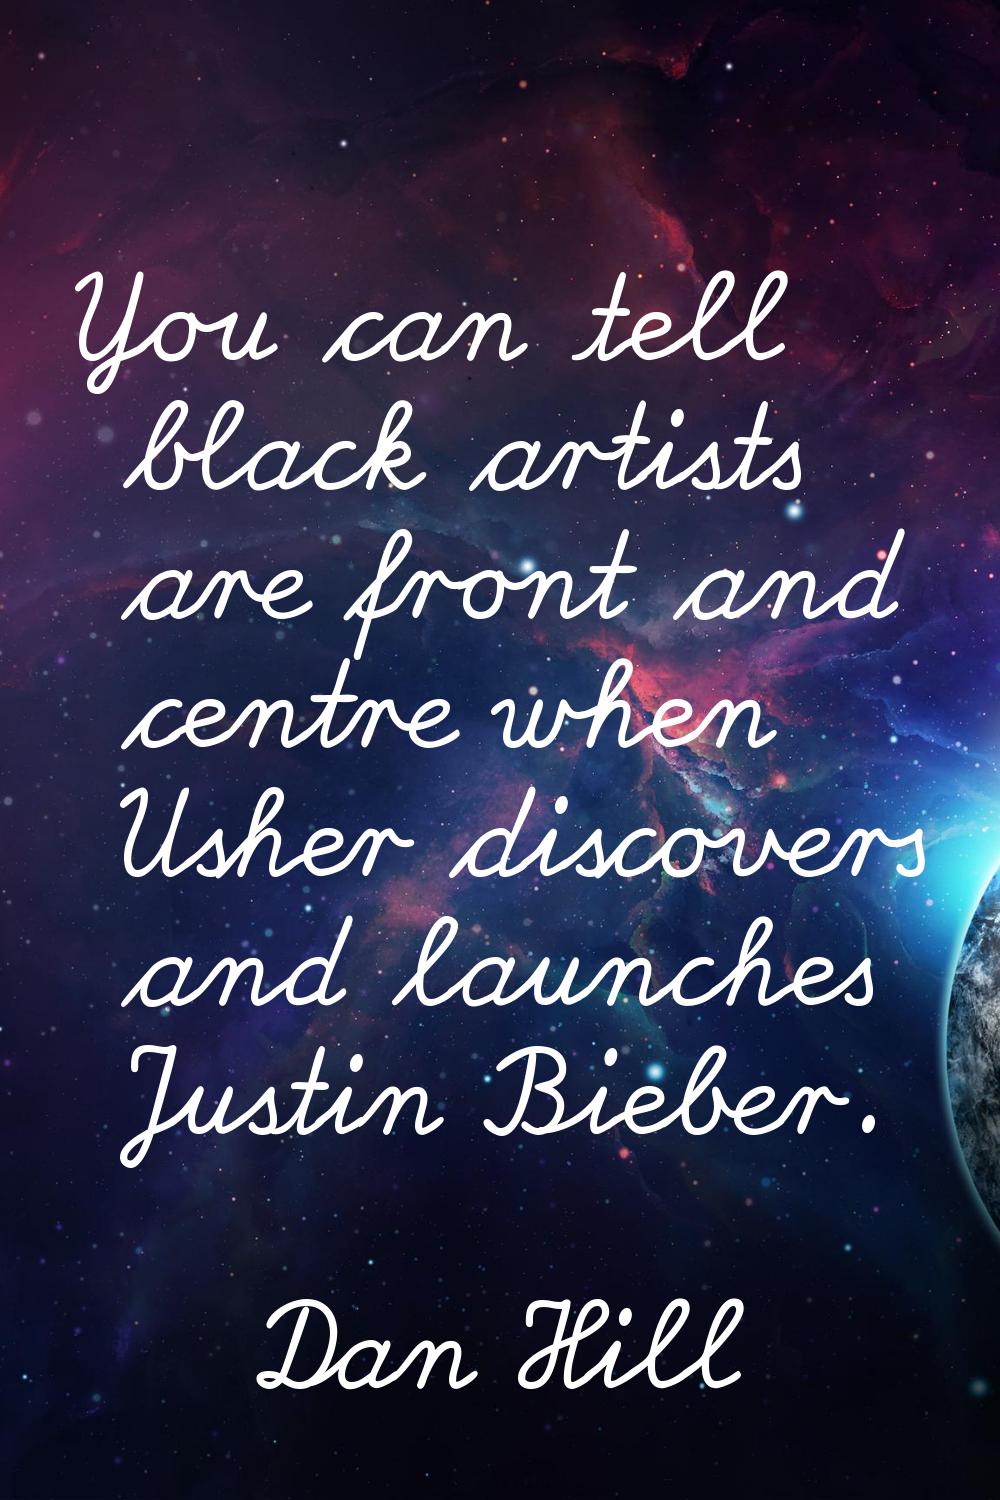 You can tell black artists are front and centre when Usher discovers and launches Justin Bieber.